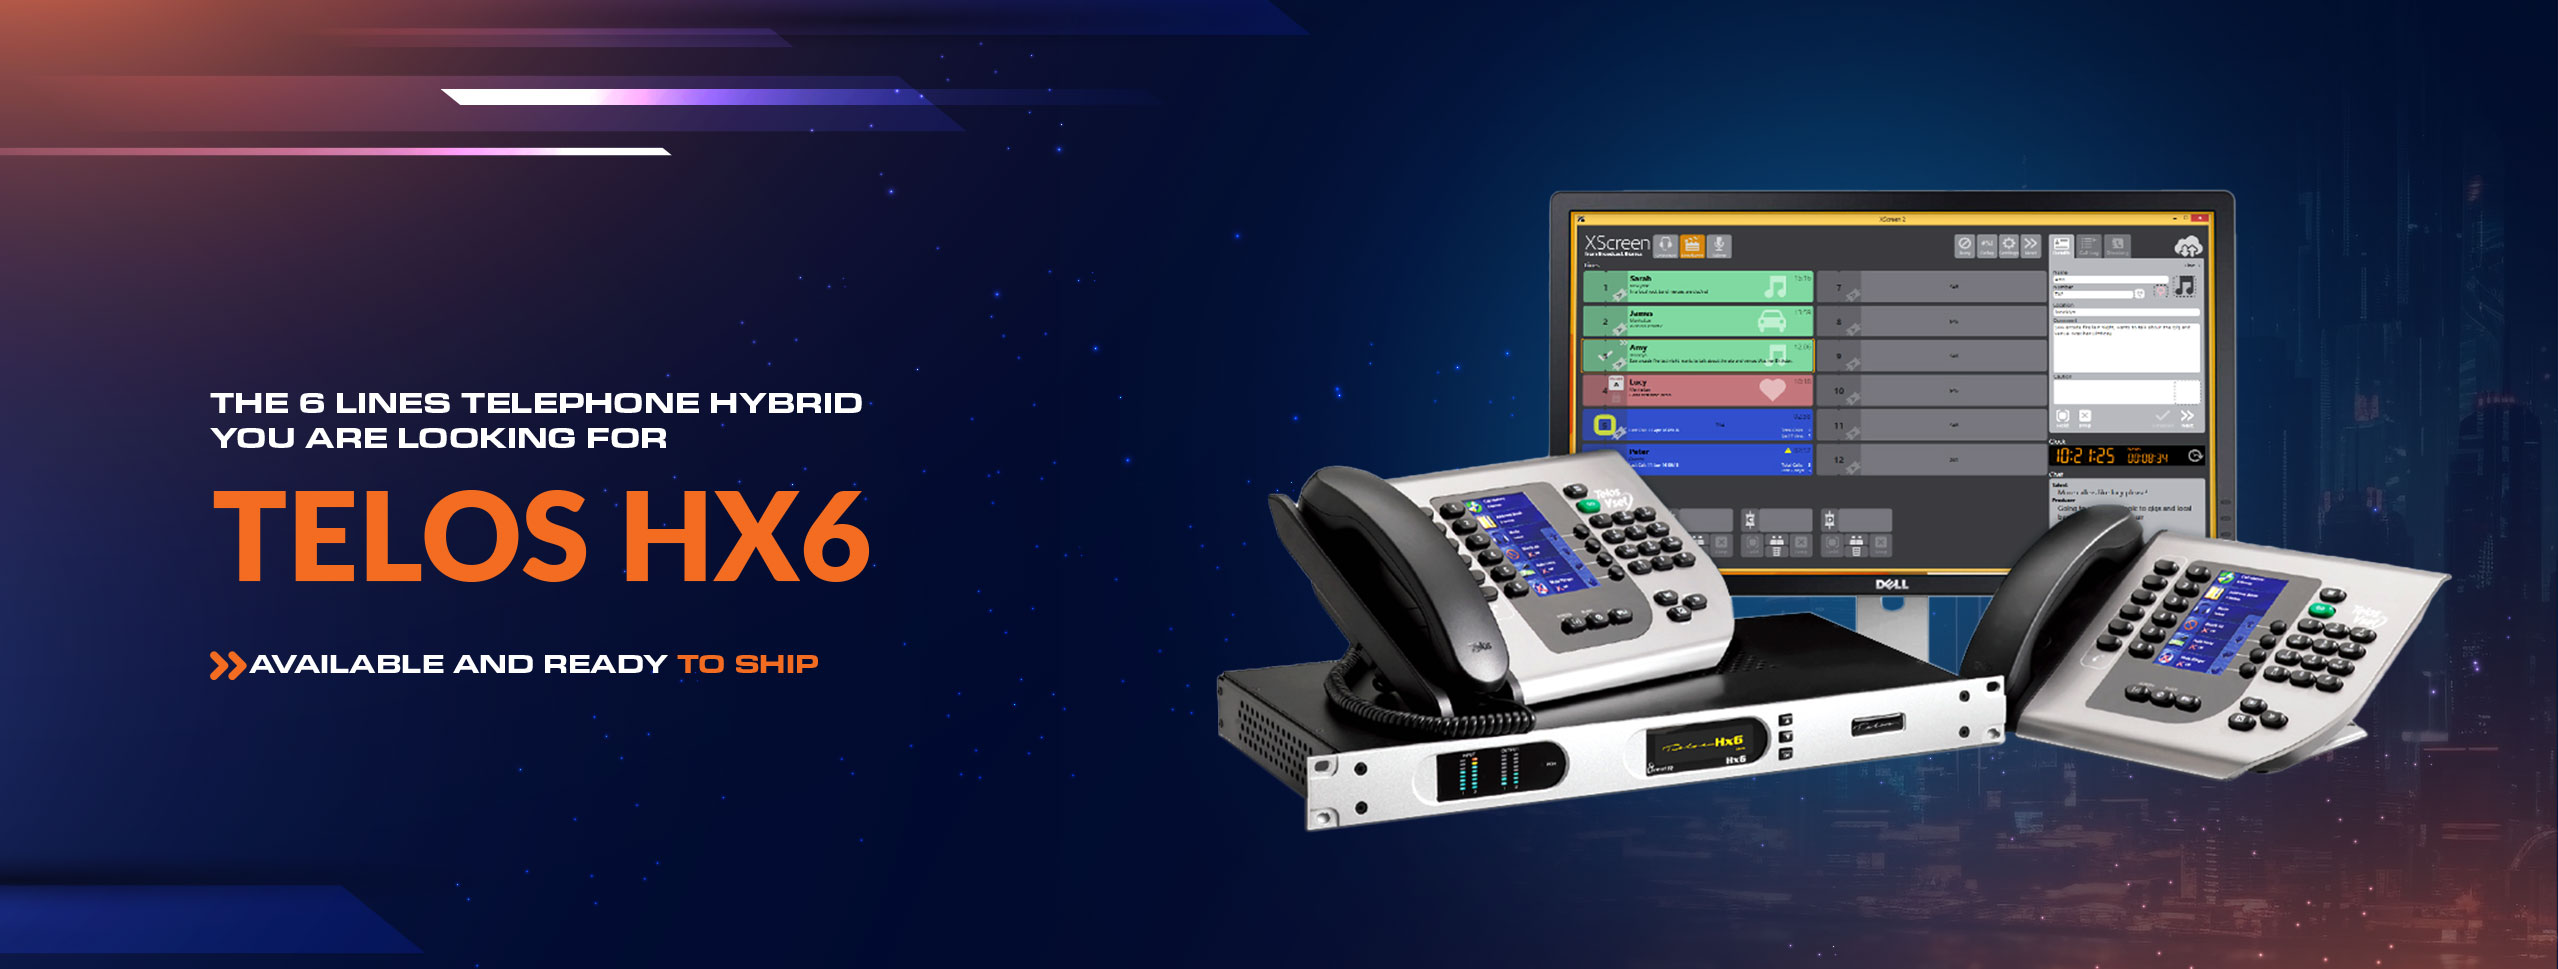 Promotional banner for a six-line hybrid telephone system called 'TELOS HX6'. In the background, a starry night sky can be seen over a blurred city skyline with skyscrapers. At the top of the banner is text that reads 'THE 6 LINES TELEPHONE HYBRID YOU ARE LOOKING FOR'. Below that, the product name 'TELOS HX6' is presented in large, bold letters in a vibrant orange color. There is an orange label underneath indicating that it is 'AVAILABLE AND READY TO SHIP'. On the right, there are images of three product components: a desk phone with a numeric keypad and display, a rectangular hardware device with indicator lights and ports on its front panel, and finally, a user interface on a computer screen showing different controls and call statuses with names like 'Sarah' and 'Amy.' The banner design is modern and professional, aiming to highlight the availability and main features of the phone system to potential buyers.